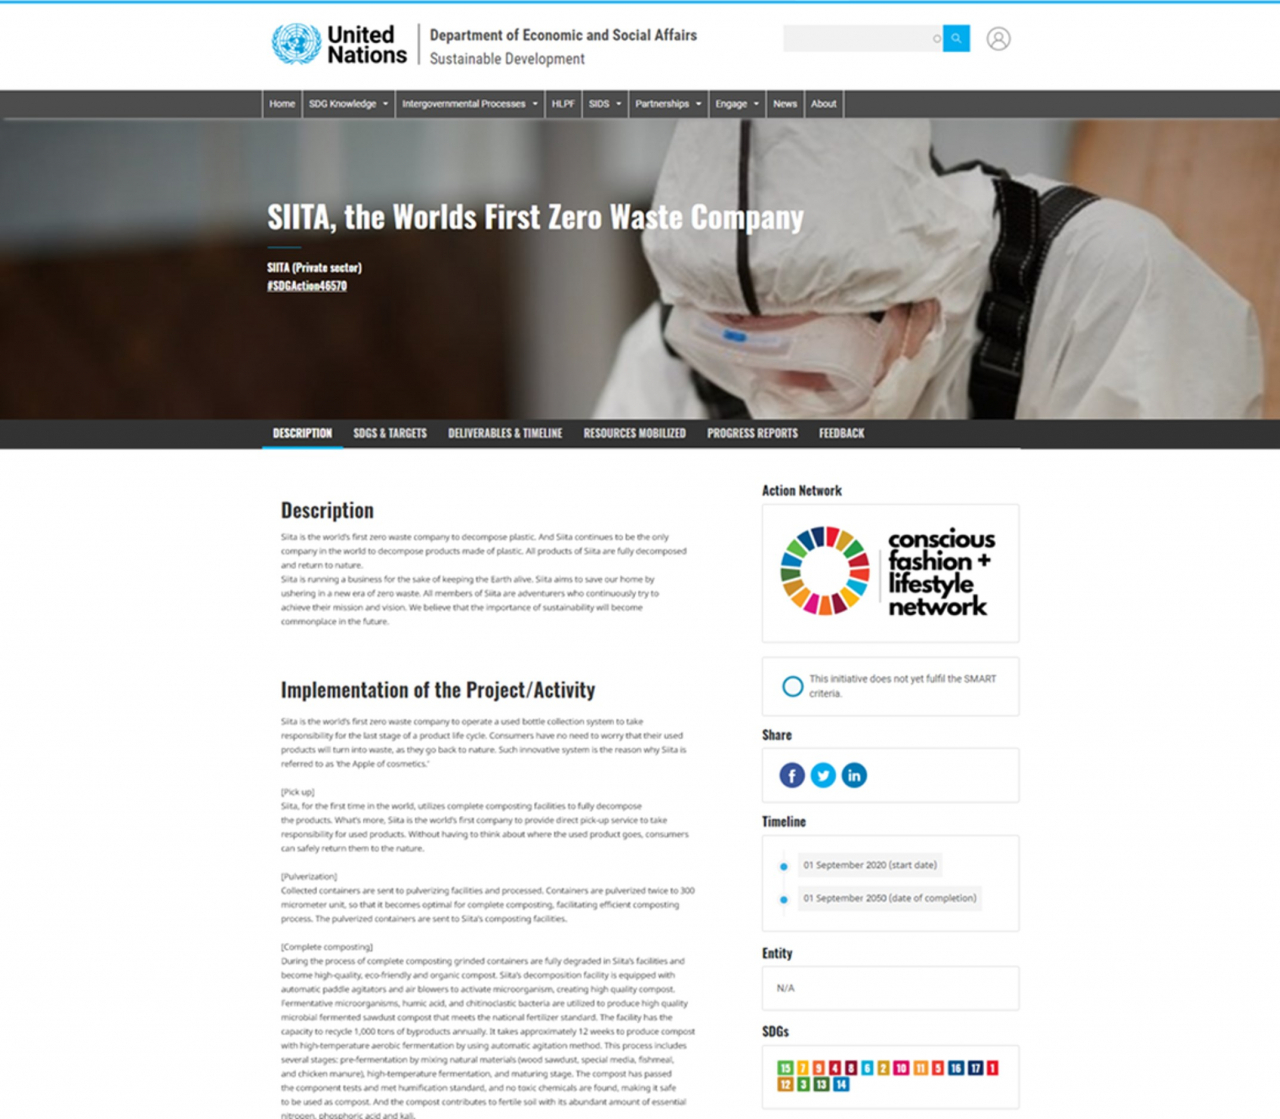 The website of Conscious Fashion and Lifestyle Network hosted by the United Nations Department of Economic and Social Affairs (Siita)